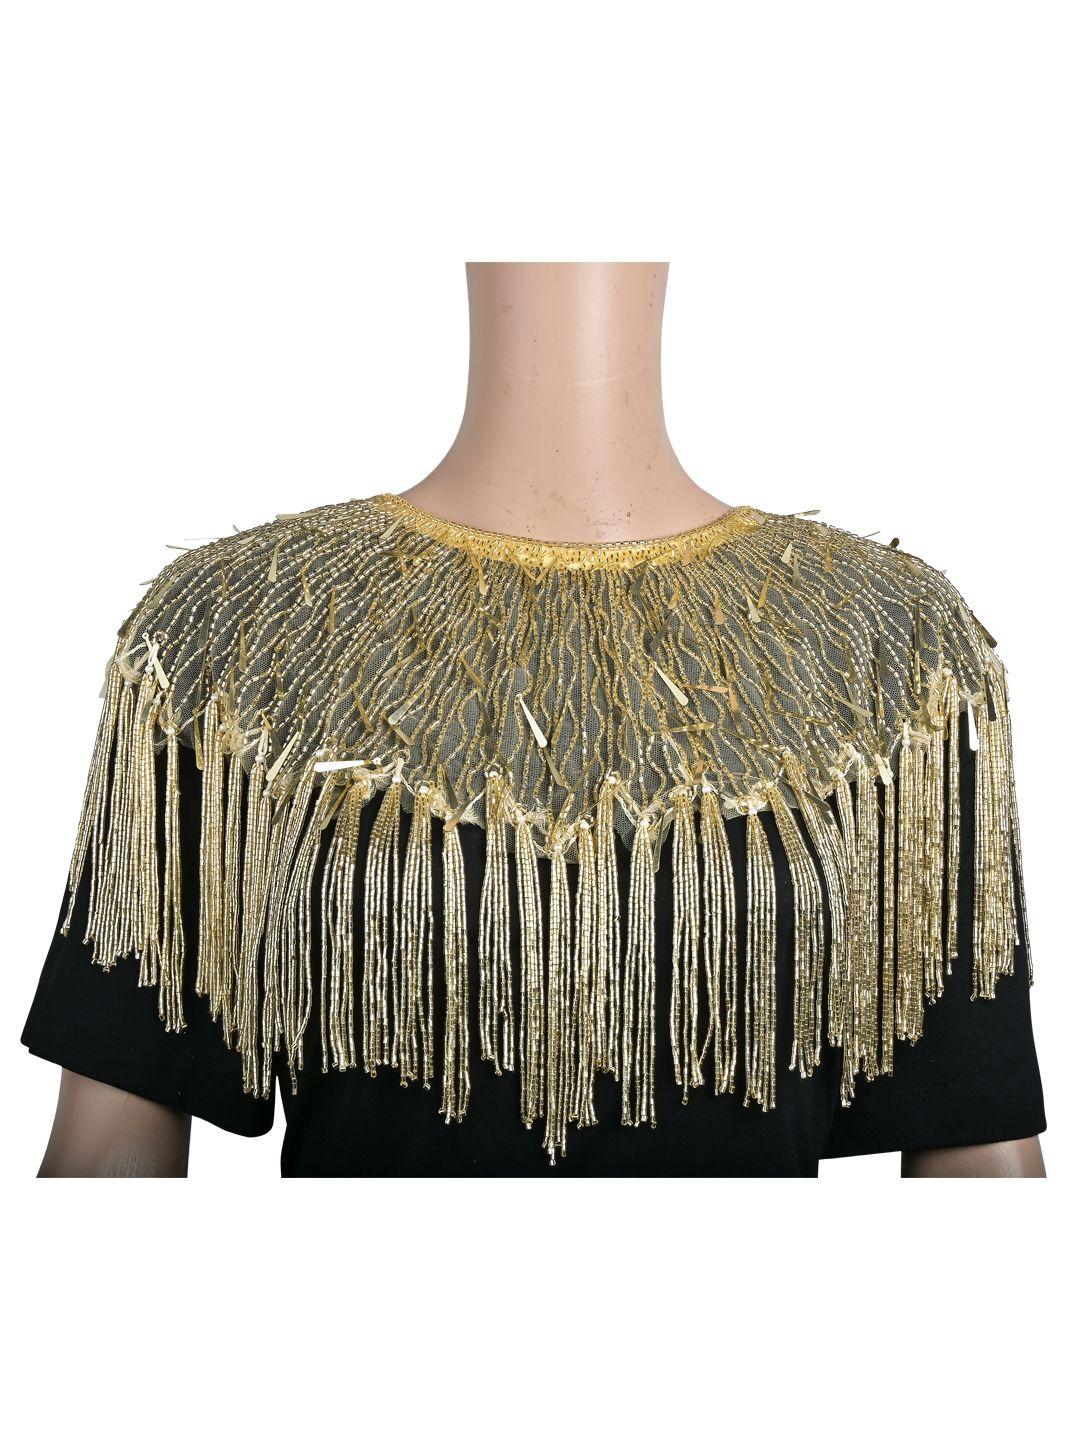 vdesi women gold-toned party tasselled crop waterfall shrug